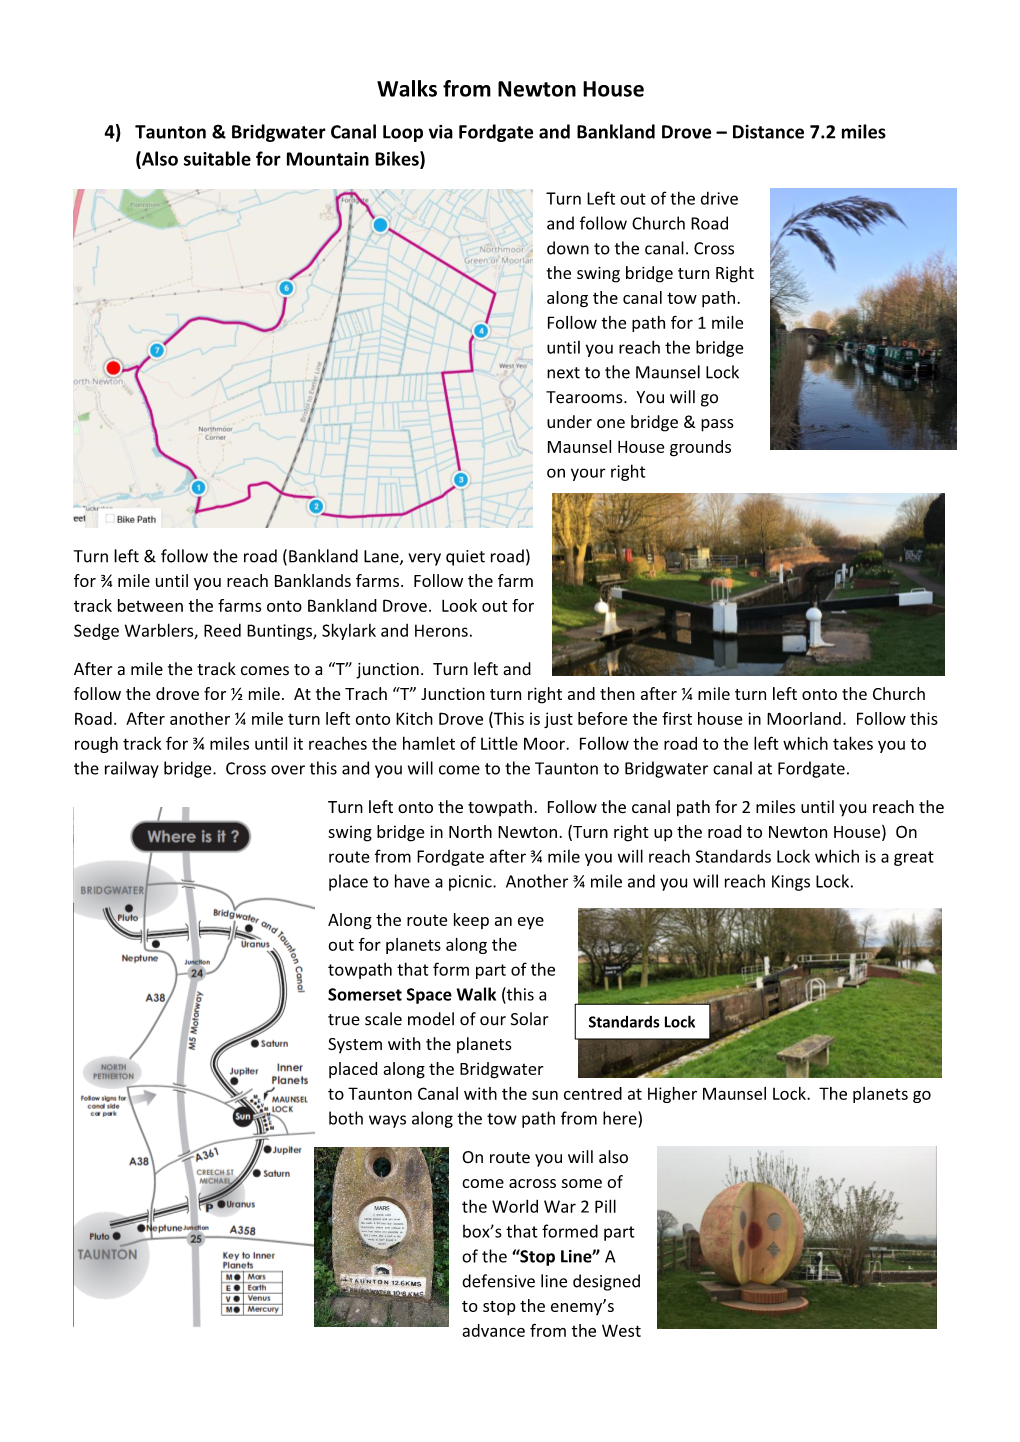 Walks from Newton House 4) Taunton & Bridgwater Canal Loop Via Fordgate and Bankland Drove – Distance 7.2 Miles (Also Suitable for Mountain Bikes)